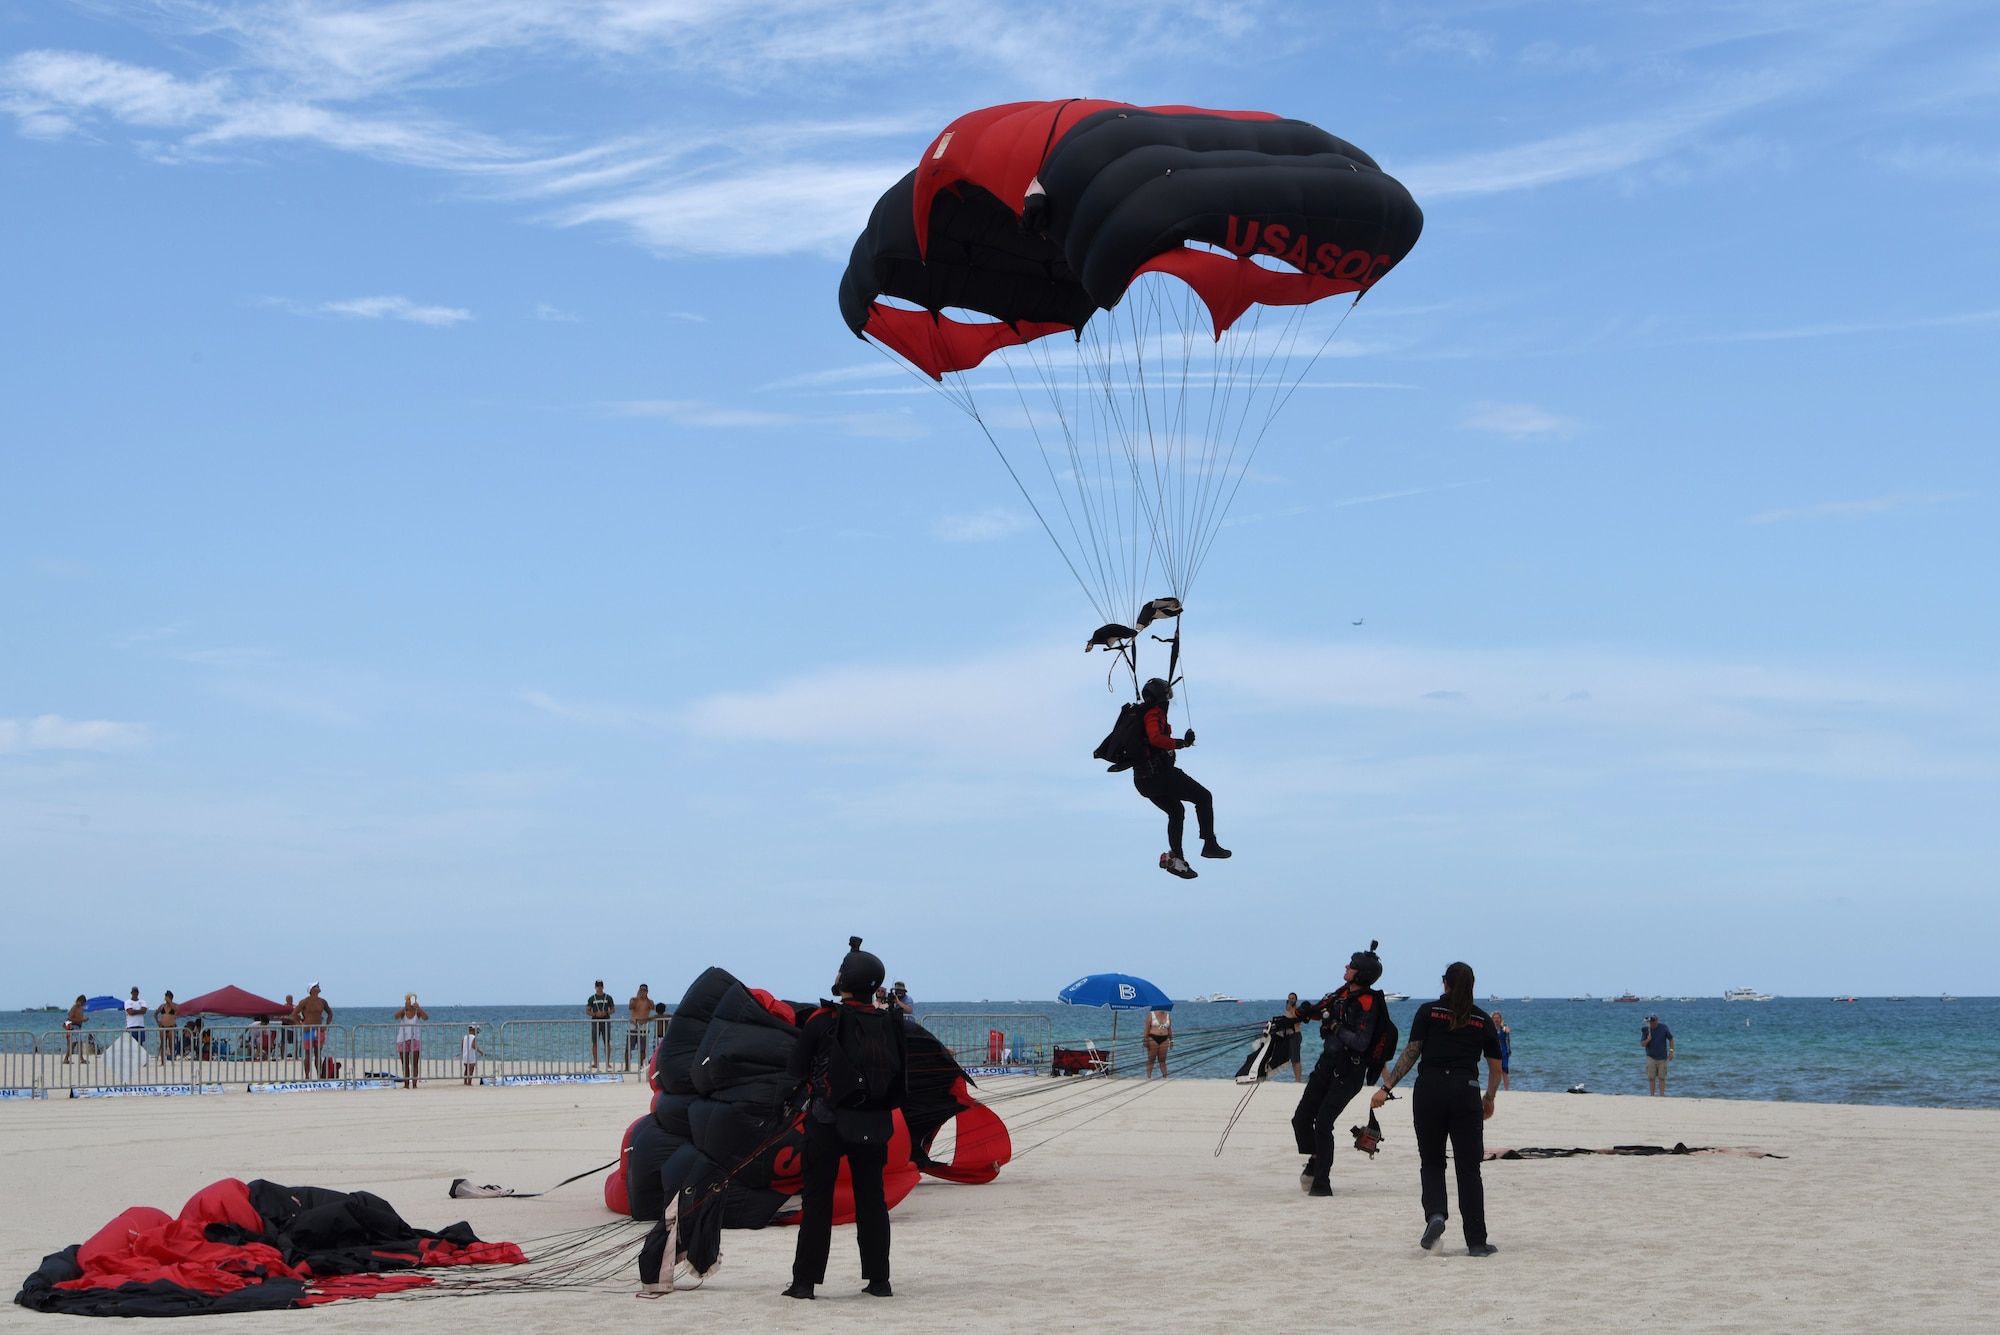 The British Army Red Devils Army Display Team lands on Miami Beach, Florida, after parachuting out of a C-17 Globemaster III piloted by the C-17 West Coast Demo Team from Joint Base Lewis-McChord, Washington, May 30, 2021. This air drop and parachuting demonstration was a part of the National Salute to Our Heroes Hyundai Air and Sea Show in Miami, which had over 100,000 viewers both days of the show. (U.S. Air Force photo by Senior Airman Mikayla Heineck)